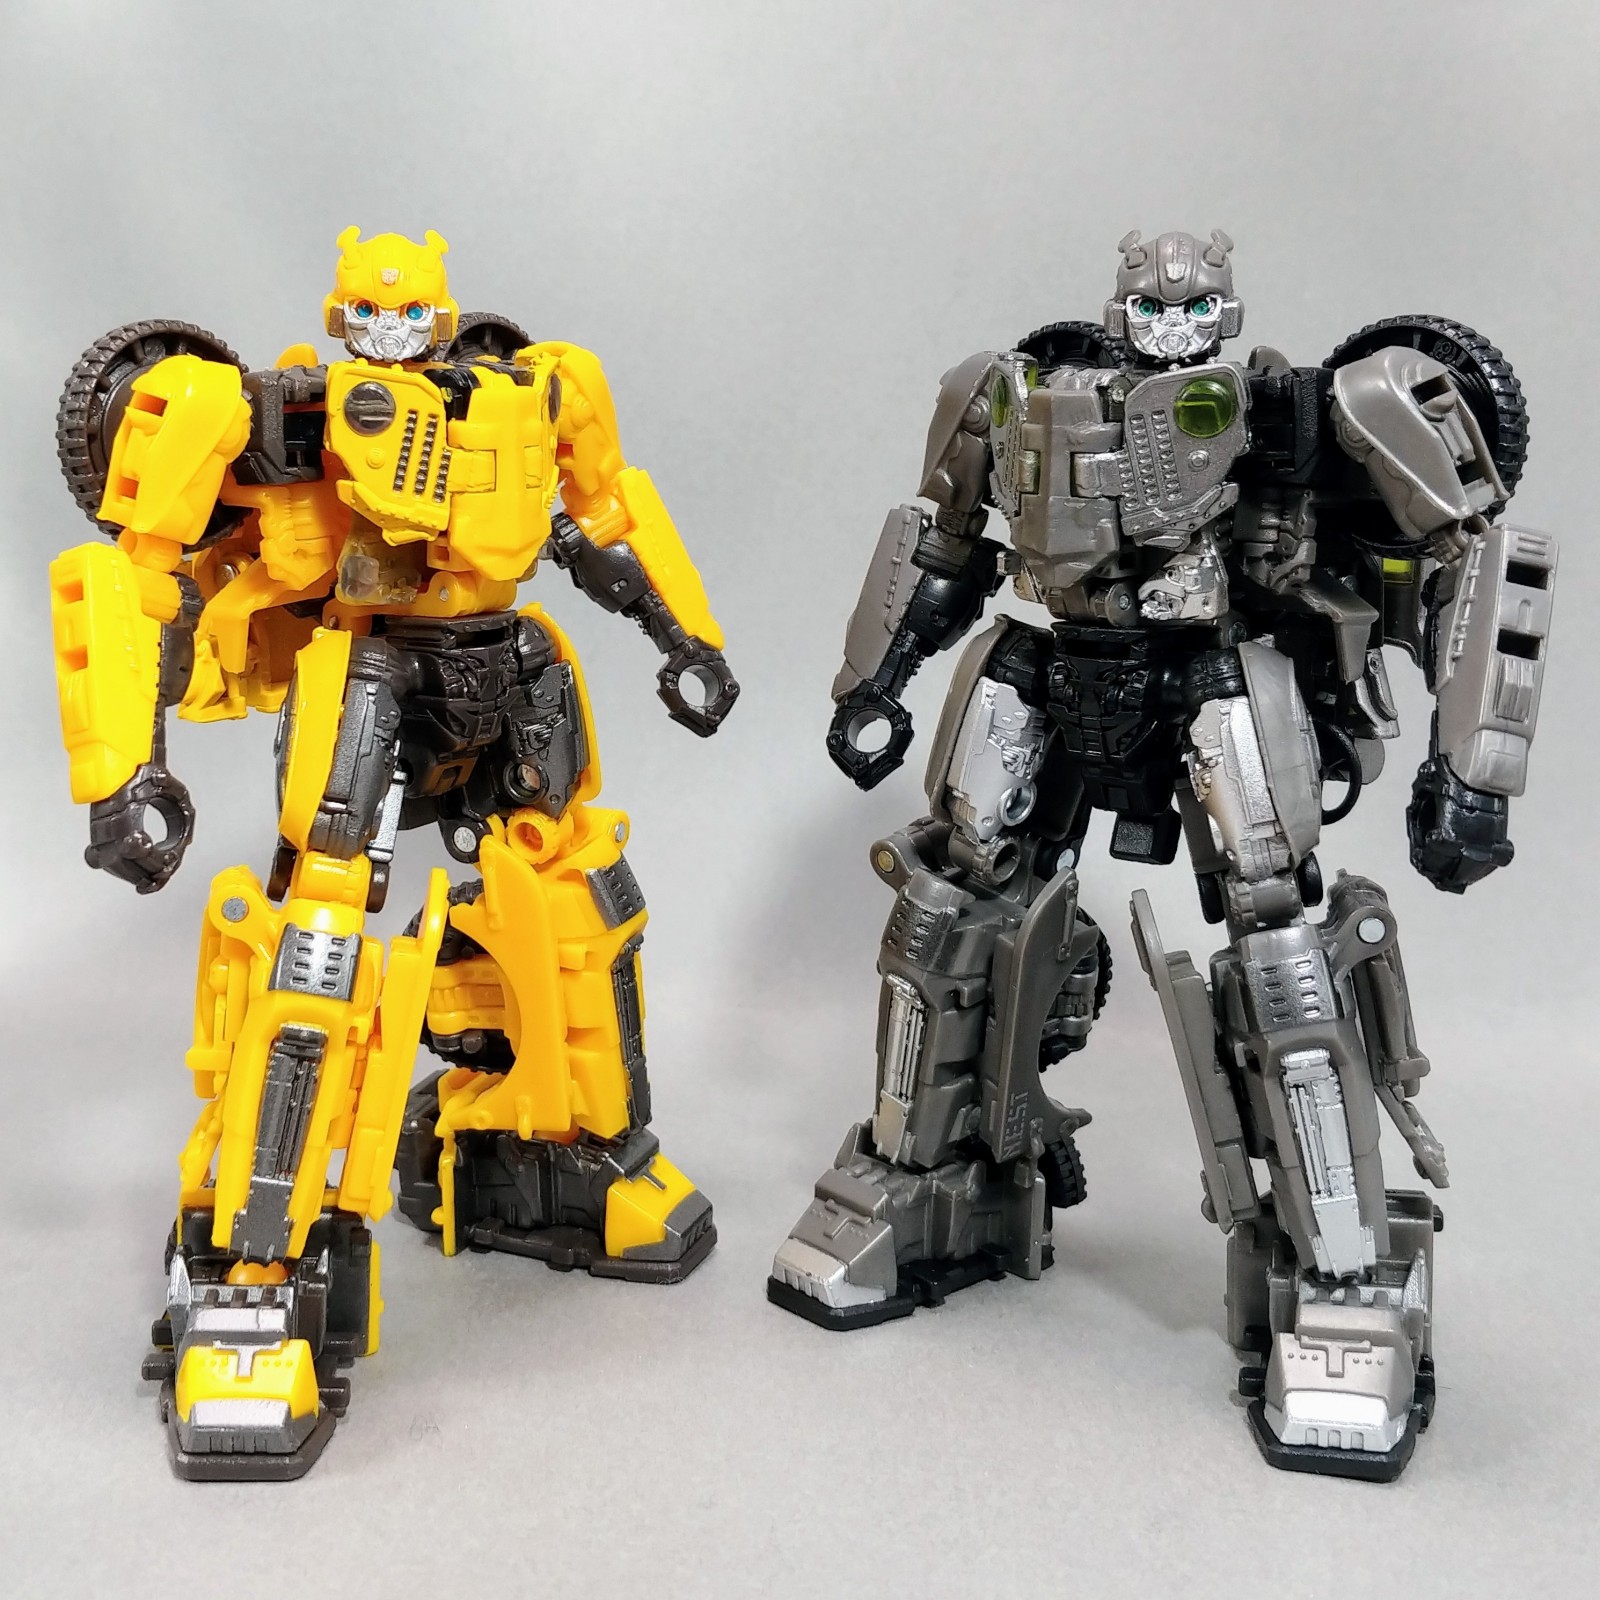 Transformers News: New In-Hand Images - Transformers Studio Series NEST Bumblebee